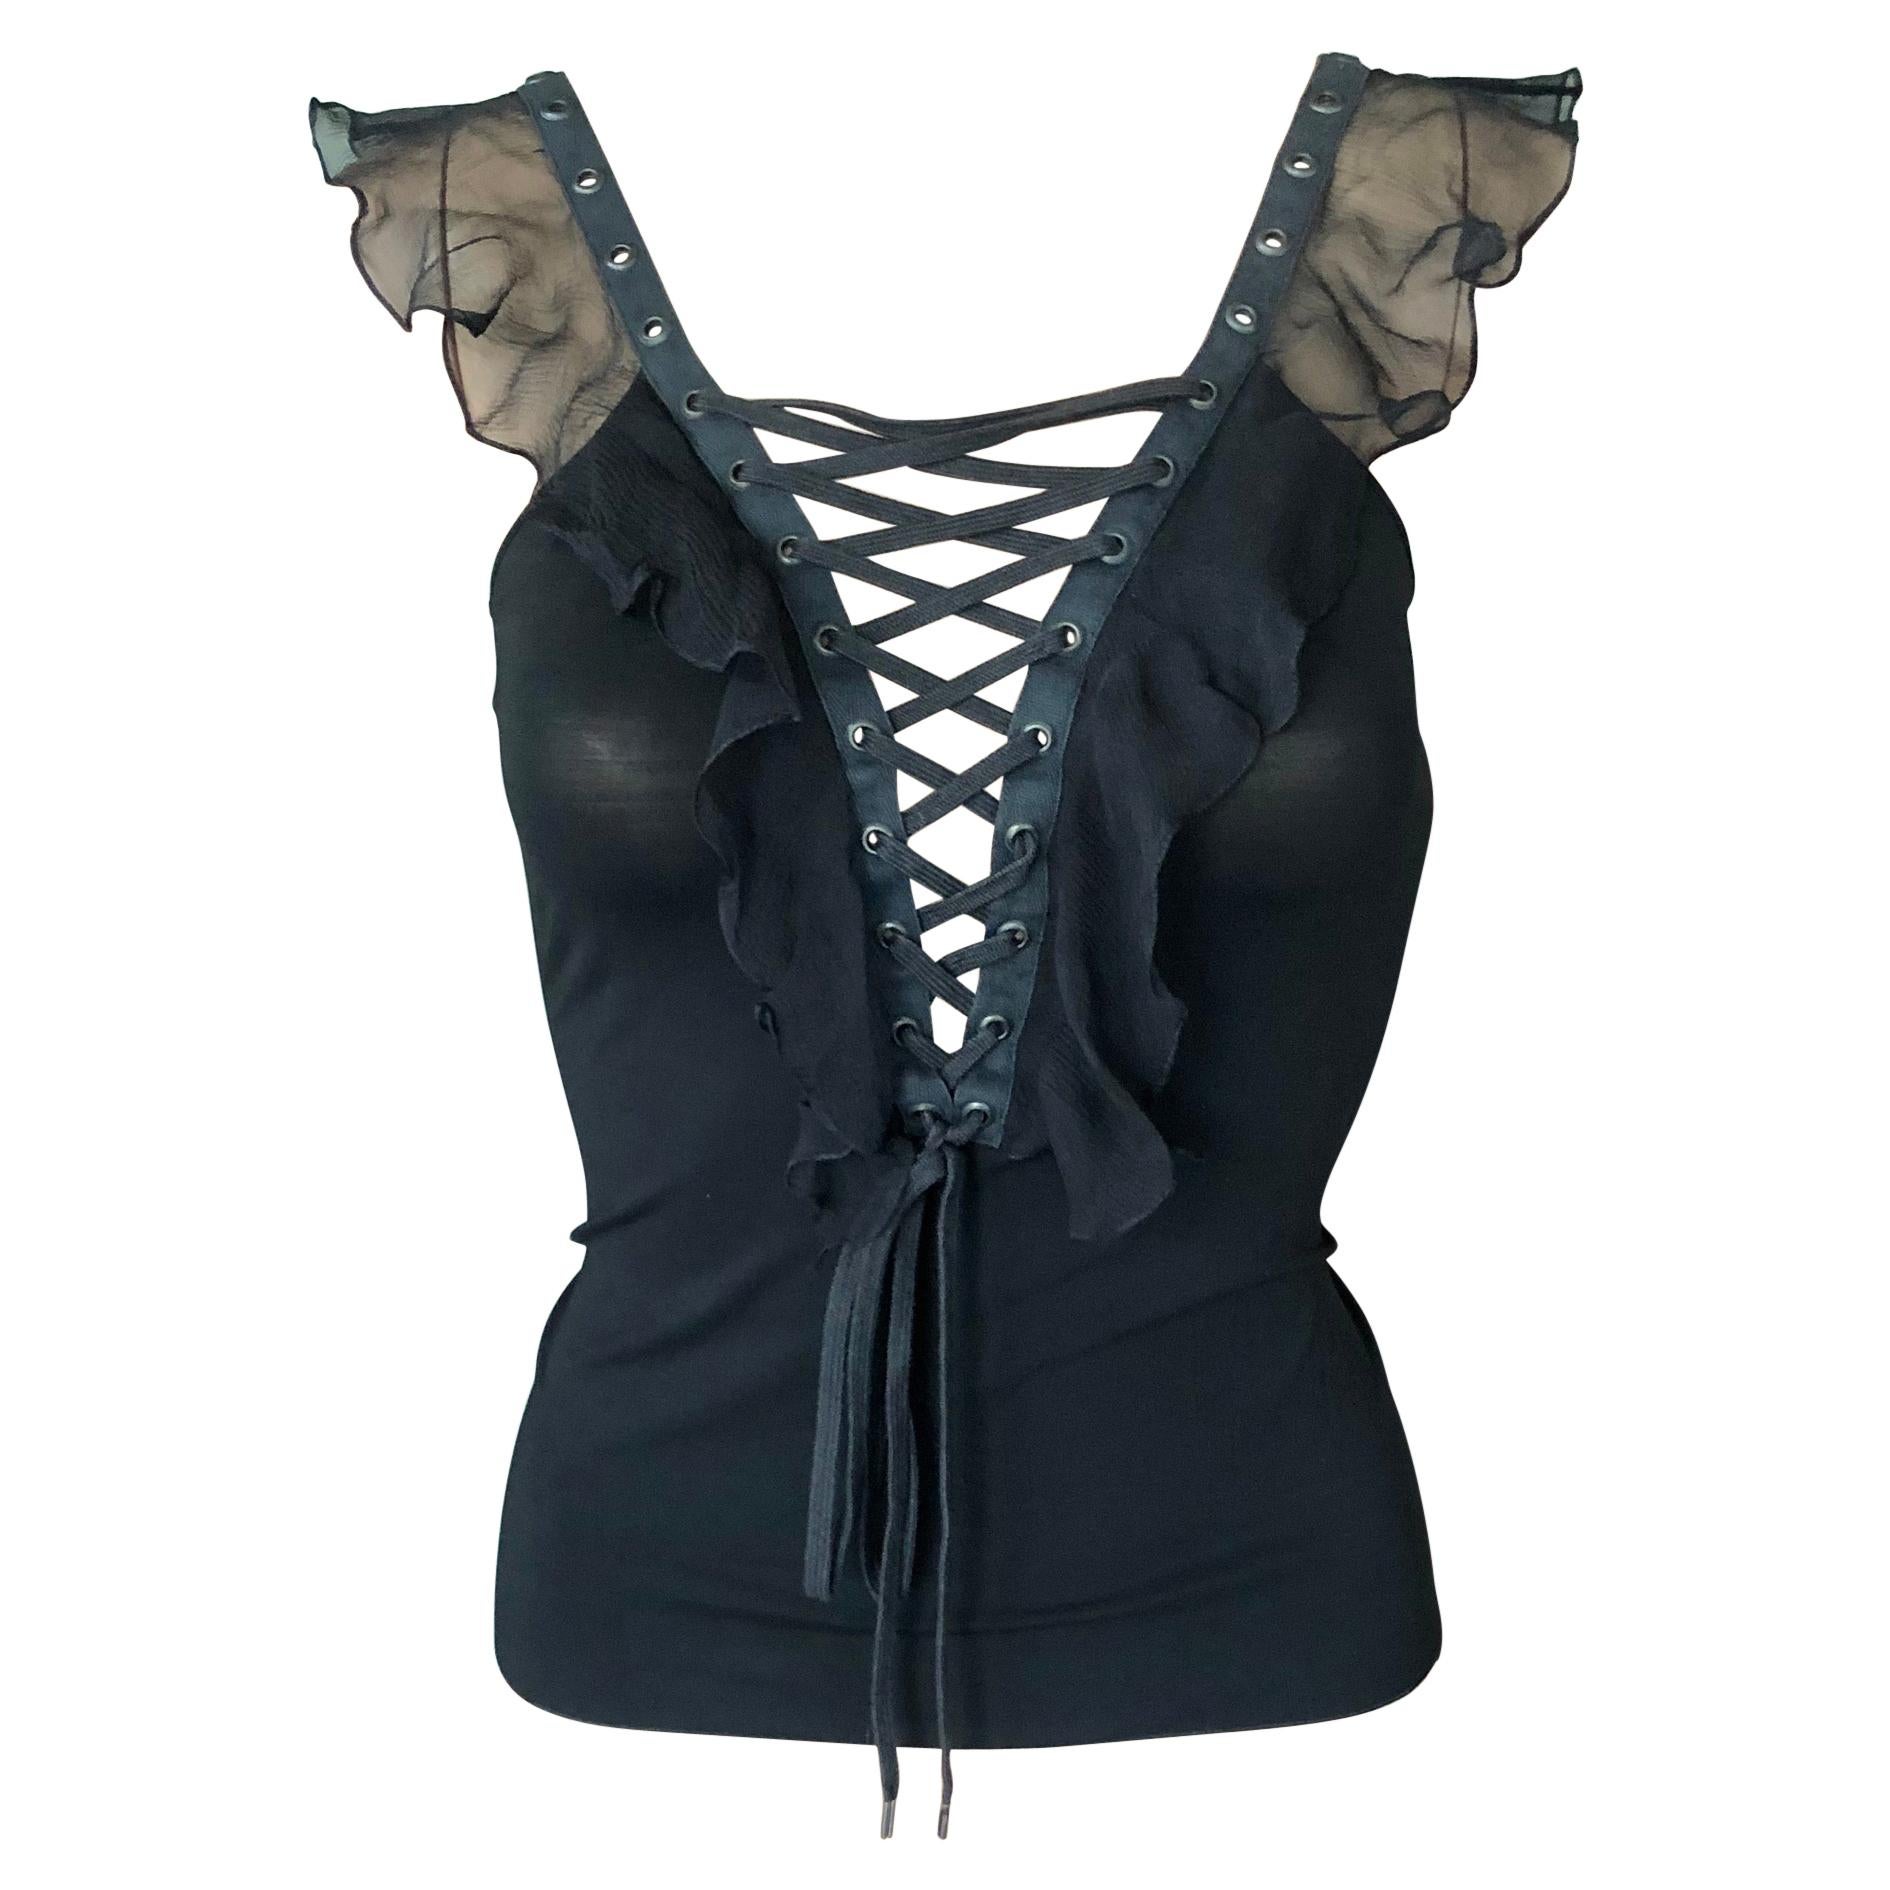 Christian Dior By John Galliano S/S 2003 Plunging Lace Up Tie Up Black Top For Sale